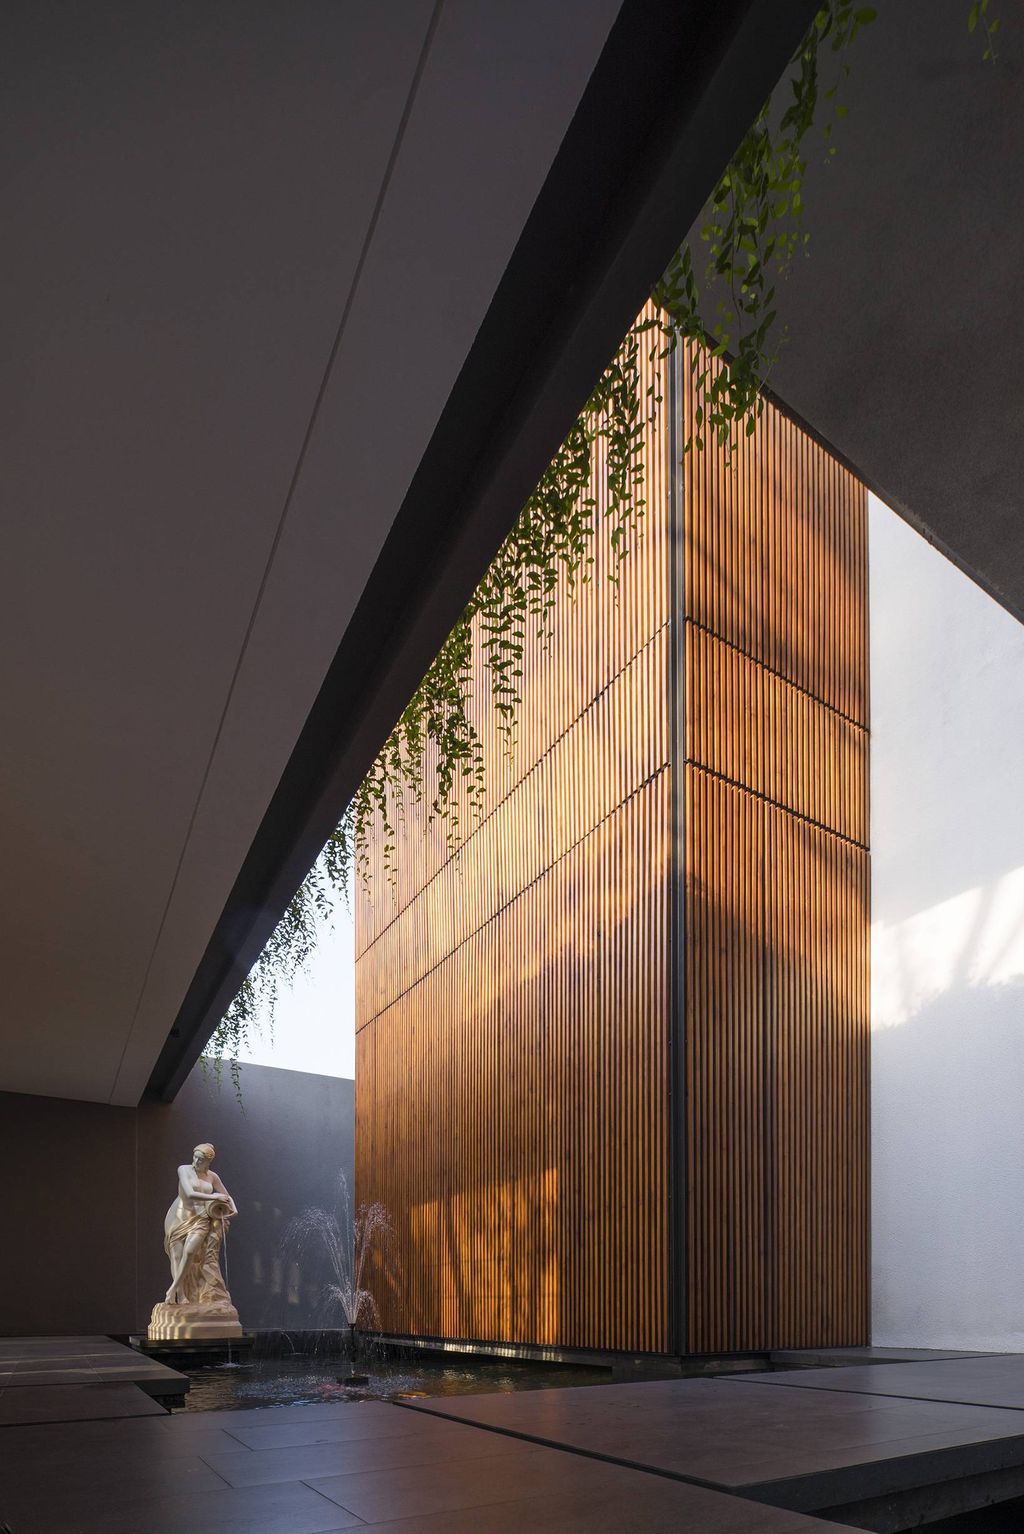 Between 2 Courtyards House offers Serene and Relaxing Spaces by Eben